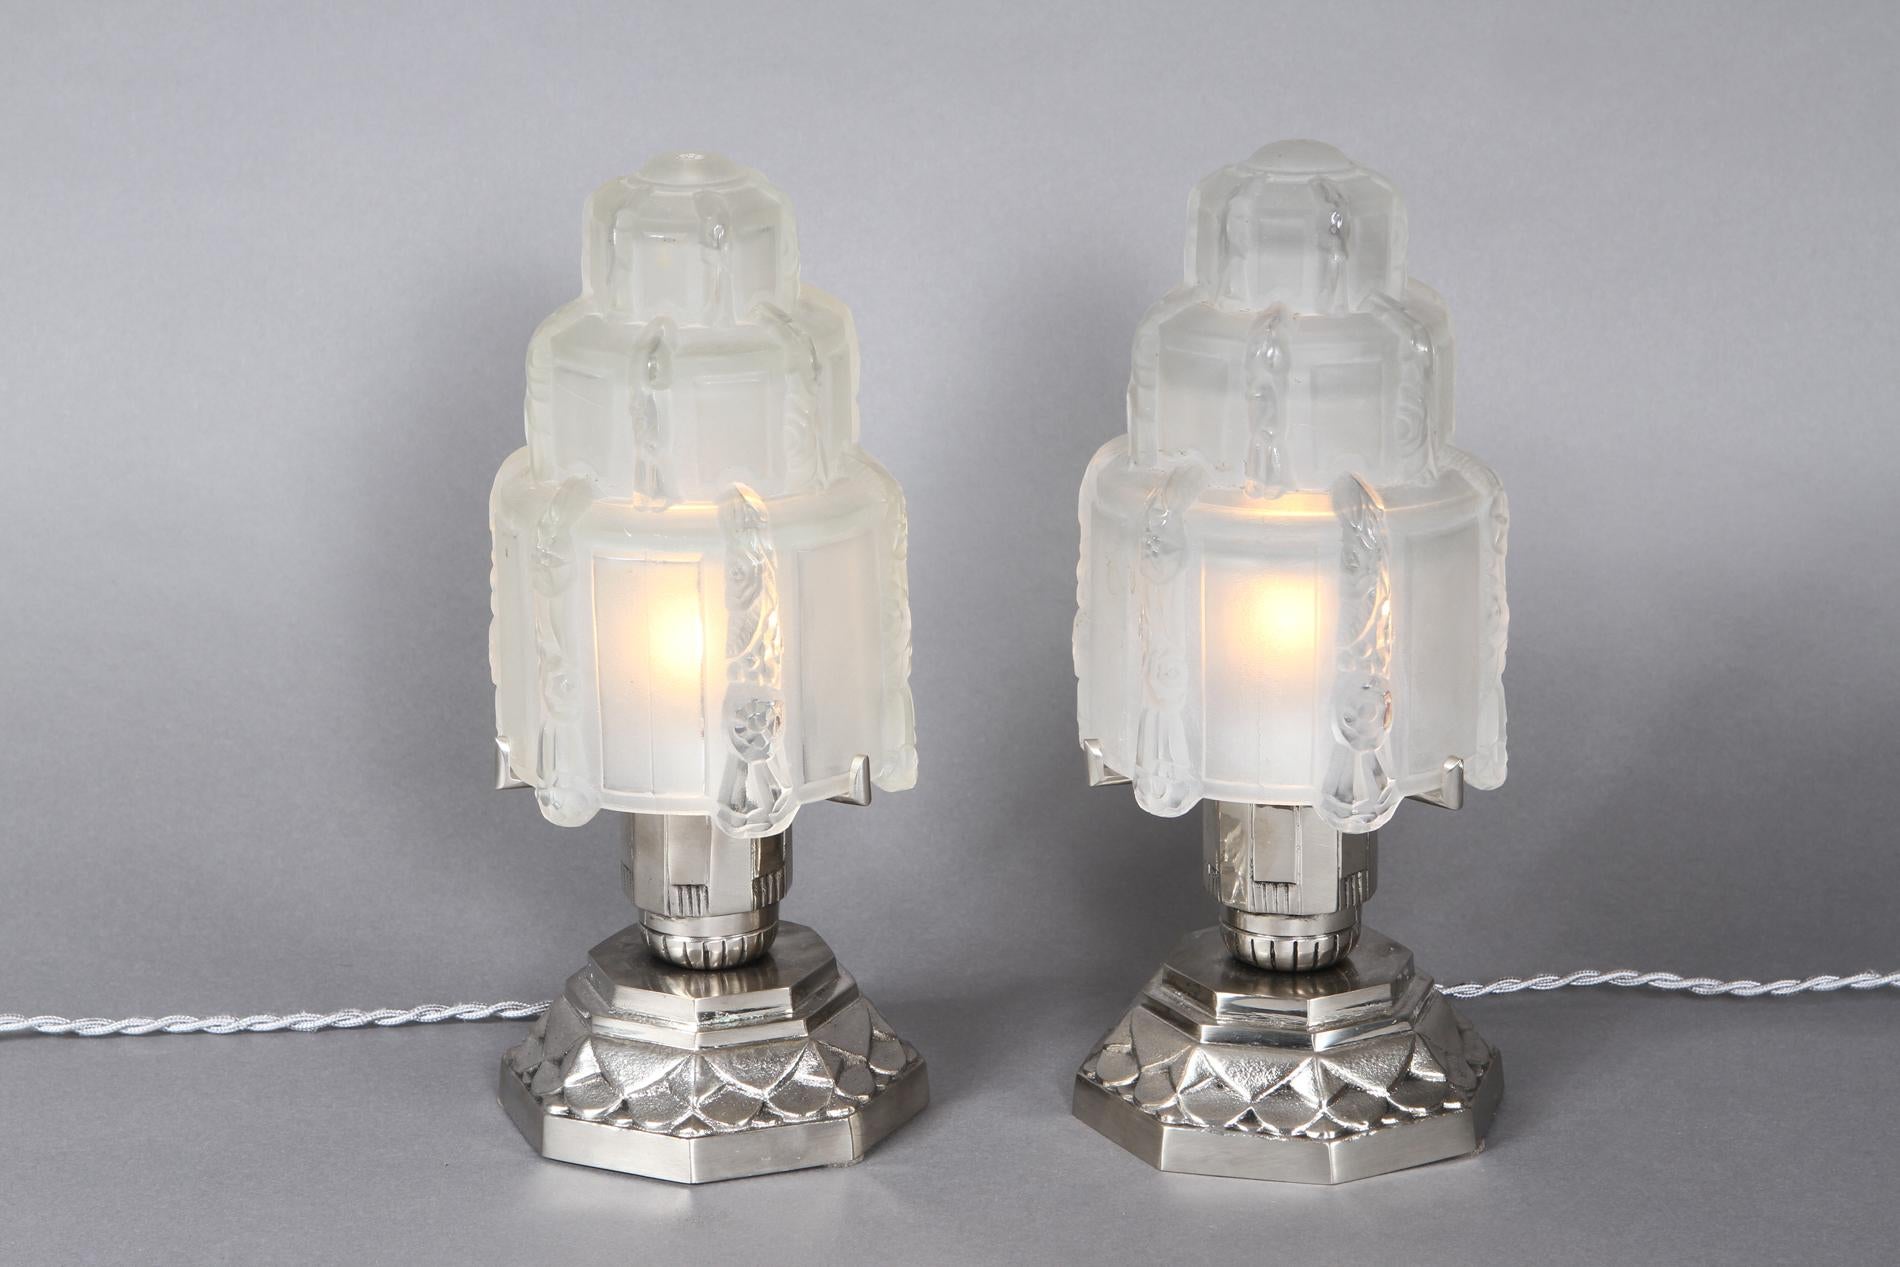 French Art Deco table lamps by Sabino, 1930. The famous 